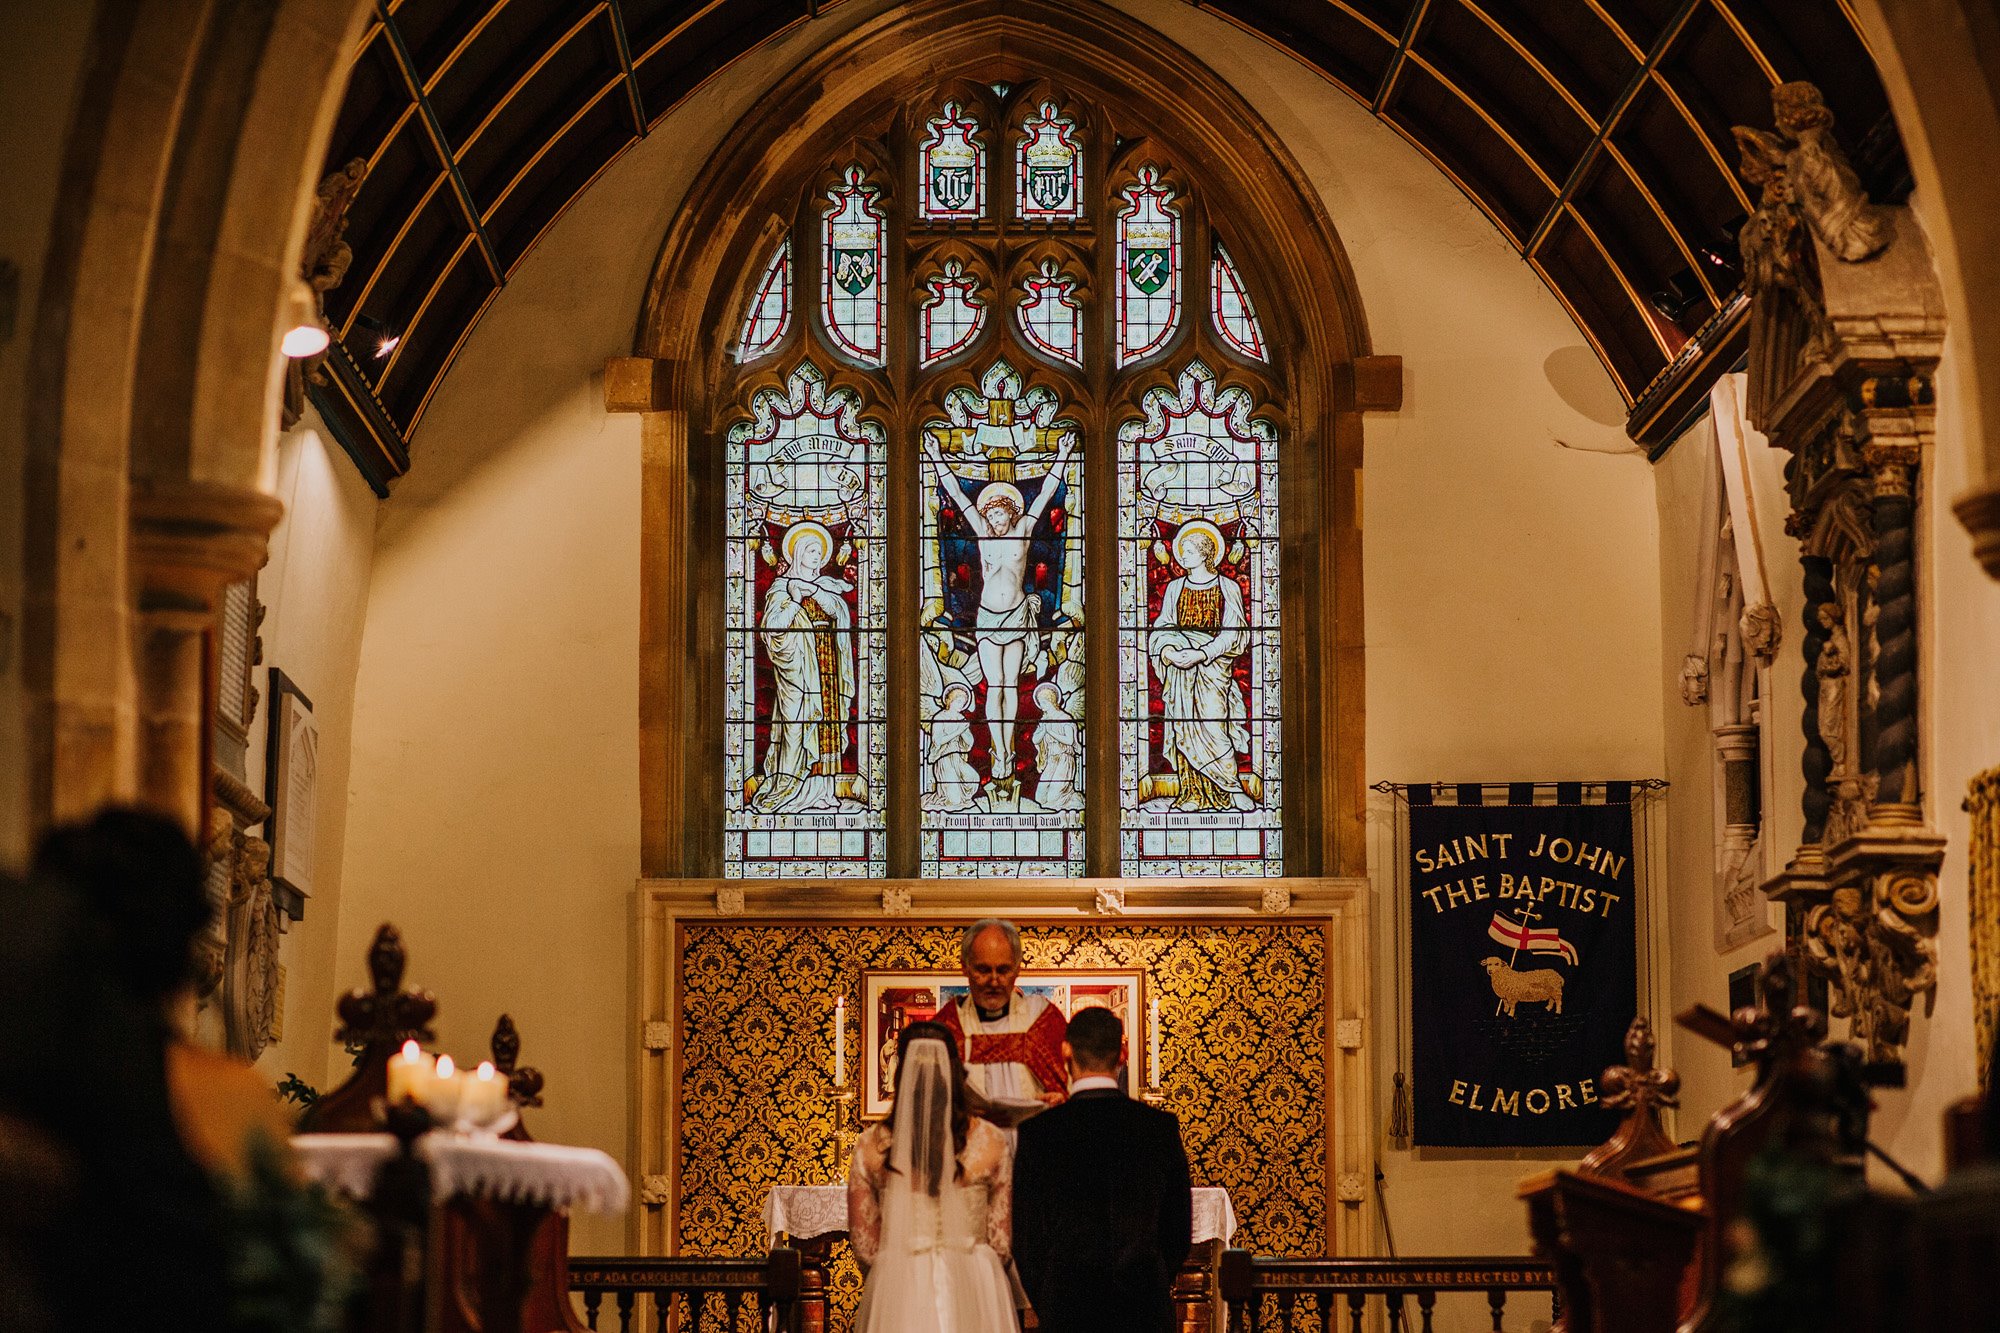 Couple and Vicar in midst of wedding ceremony at the stunning Elmore church in England with high ceilings, stained glass windows and gold details